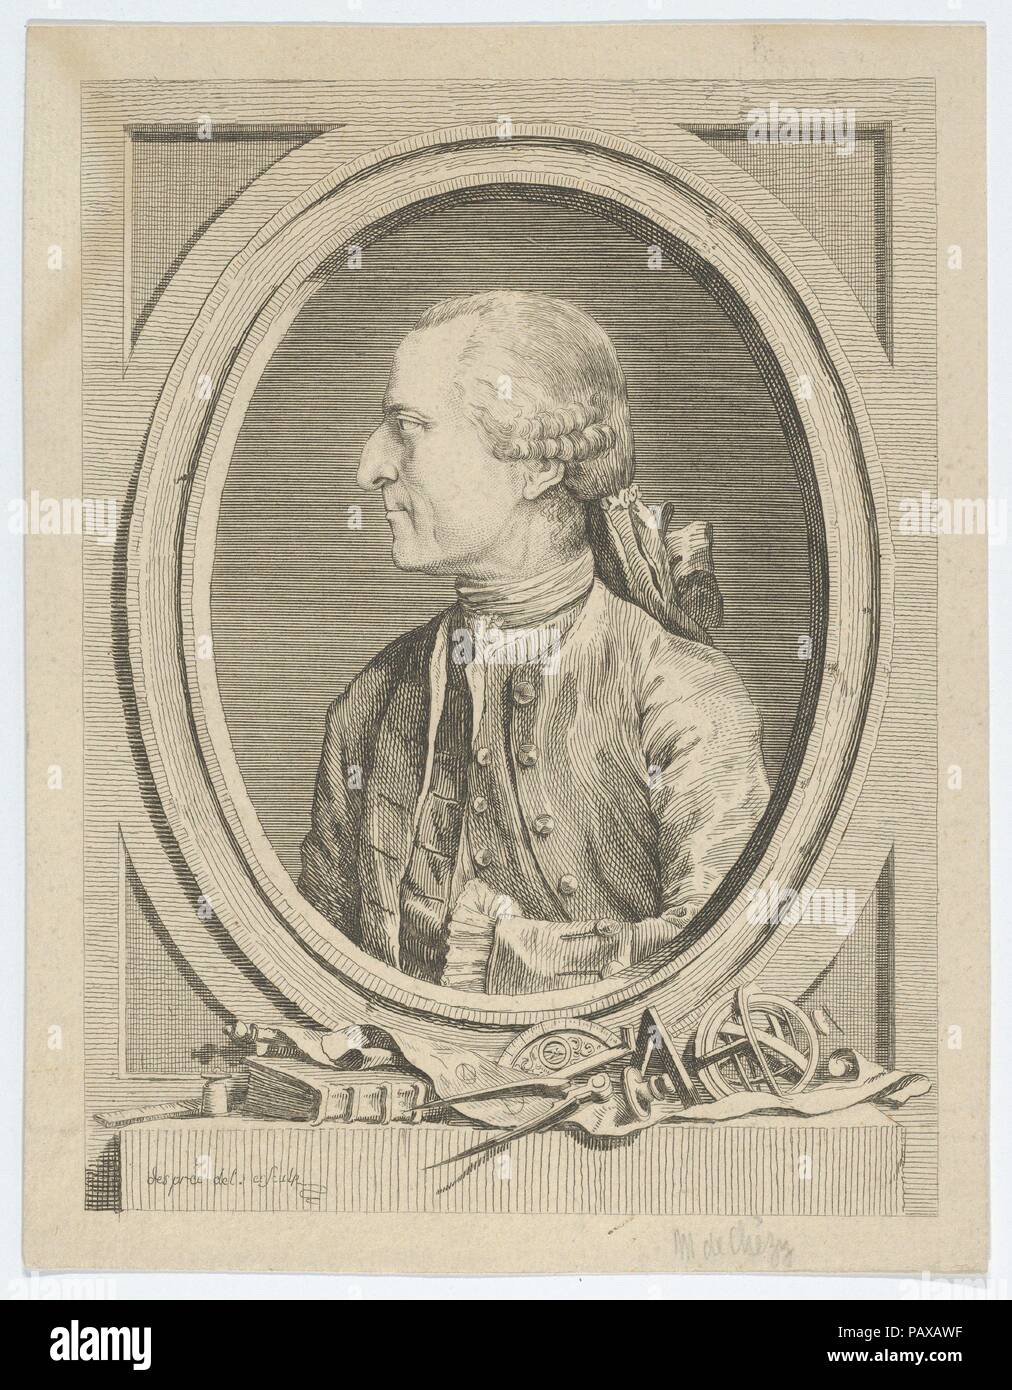 Antoine de Chézy. Artist: Louis Jean Desprez (French, Auxerre 1743-1804 Stockholm). Dimensions: Sheet: 8 9/16 × 6 9/16 in. (21.7 × 16.7 cm). Date: ca.1772-76.  The subject of the print, Antoine de Chézy (1718-1798) was a French hydraulics engineer, made director of the École nationale des ponts et chaussées shortly before his death in 1798. It is among the earlier works of Desprez, one of the 18th century's most original and accomplished printmakers. Although the oval format is conventional, the technique is distinguished by Desprez's elegant line, at once wobbly and self-assured. Museum: Metr Stock Photo